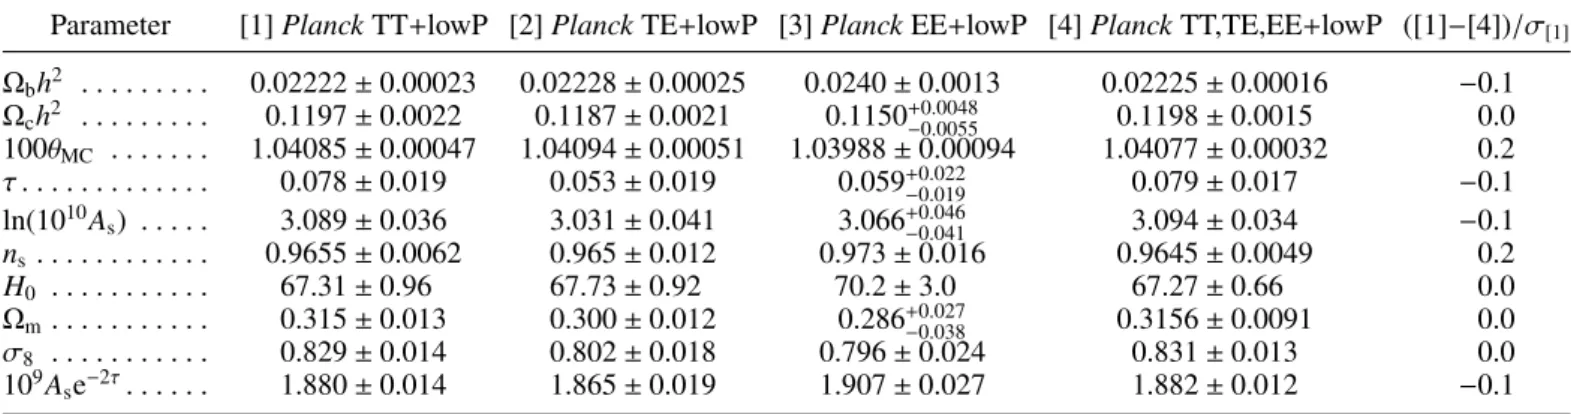 Table 3. Parameters of the base ΛCDM cosmology computed from the 2015 baseline Planck likelihoods, illustrating the consistency of parameters determined from the temperature and polarization spectra at high multipoles.